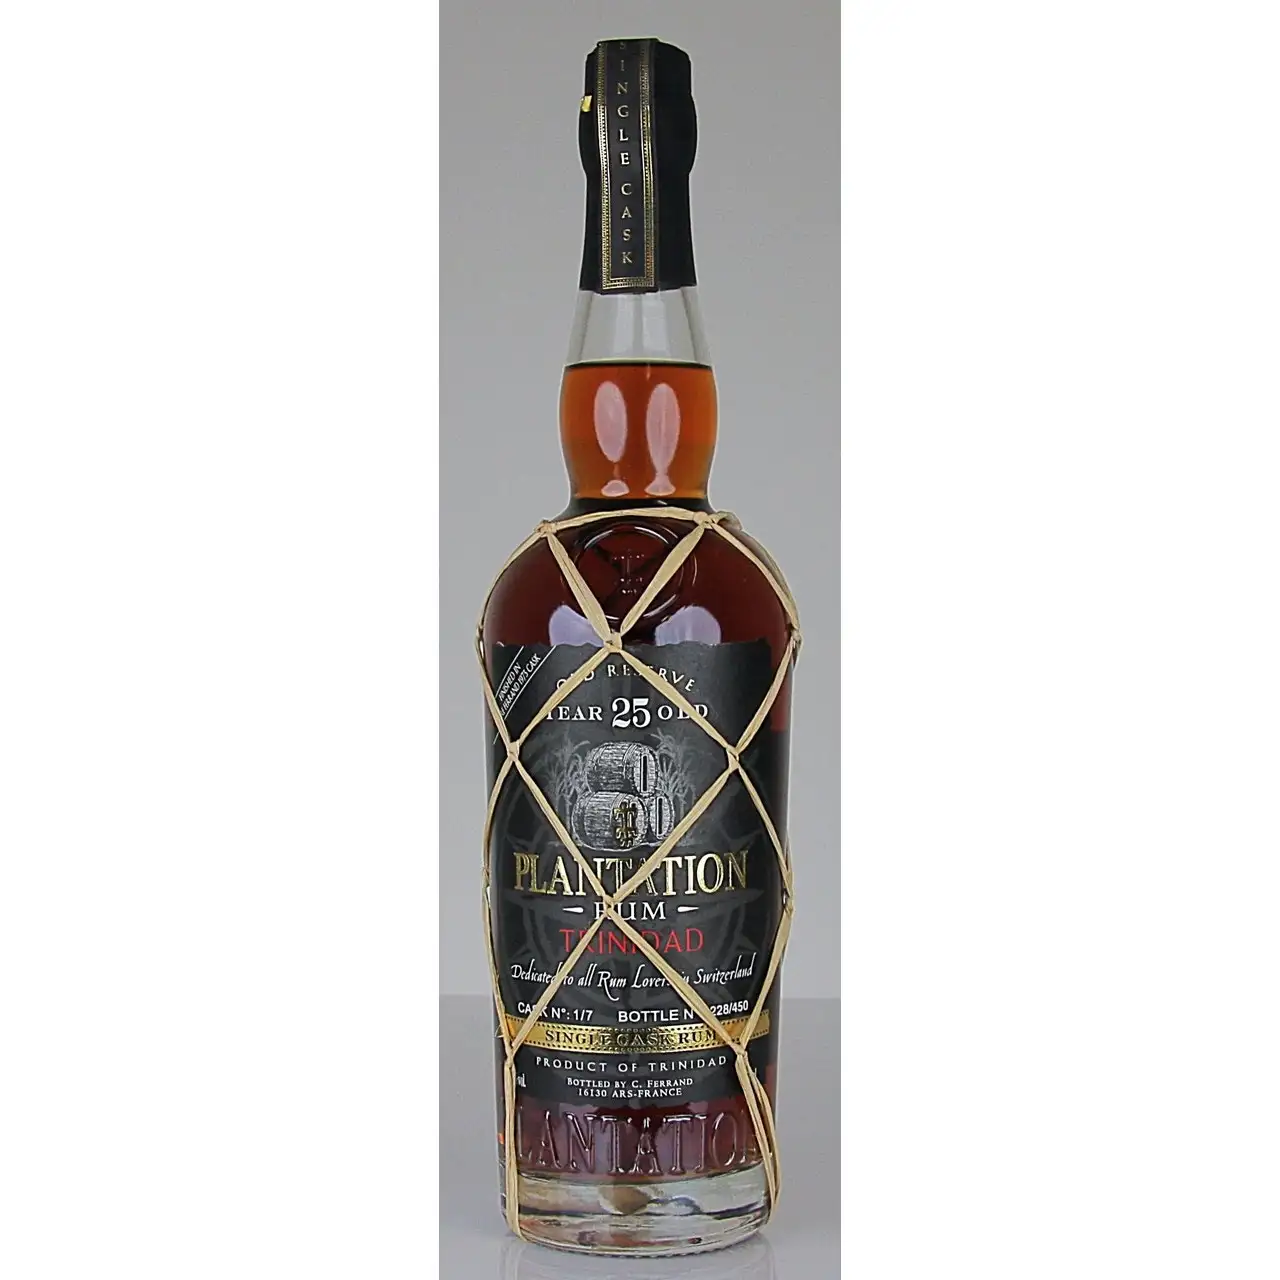 Image of the front of the bottle of the rum Plantation Old Reserve 25 Year Old (Rum Lovers in Switzerland)